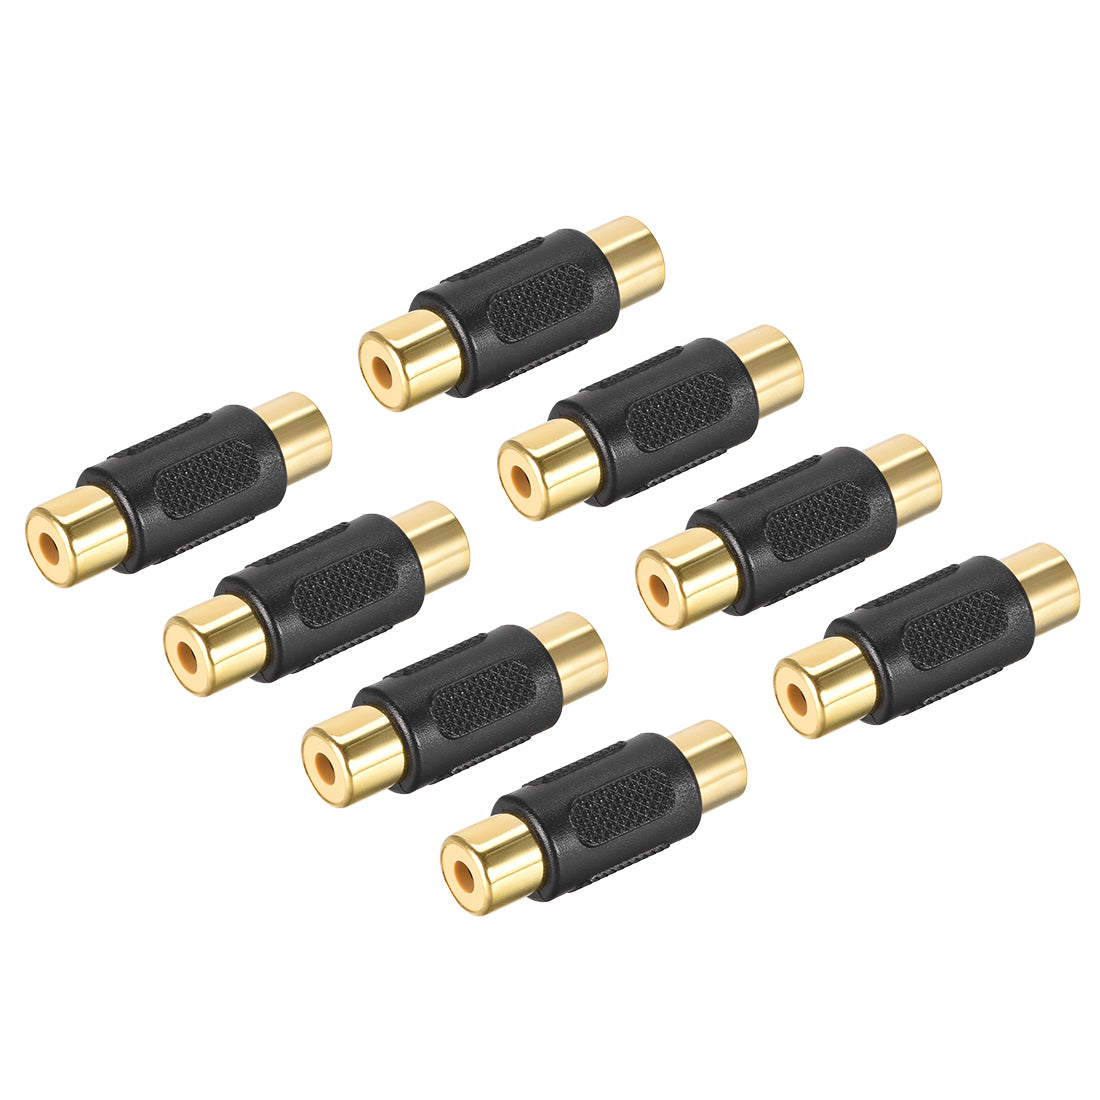 uxcell Uxcell Single RCA Female to Female Connector Stereo Audio Video Cable Adapter Coupler Black 8pcs